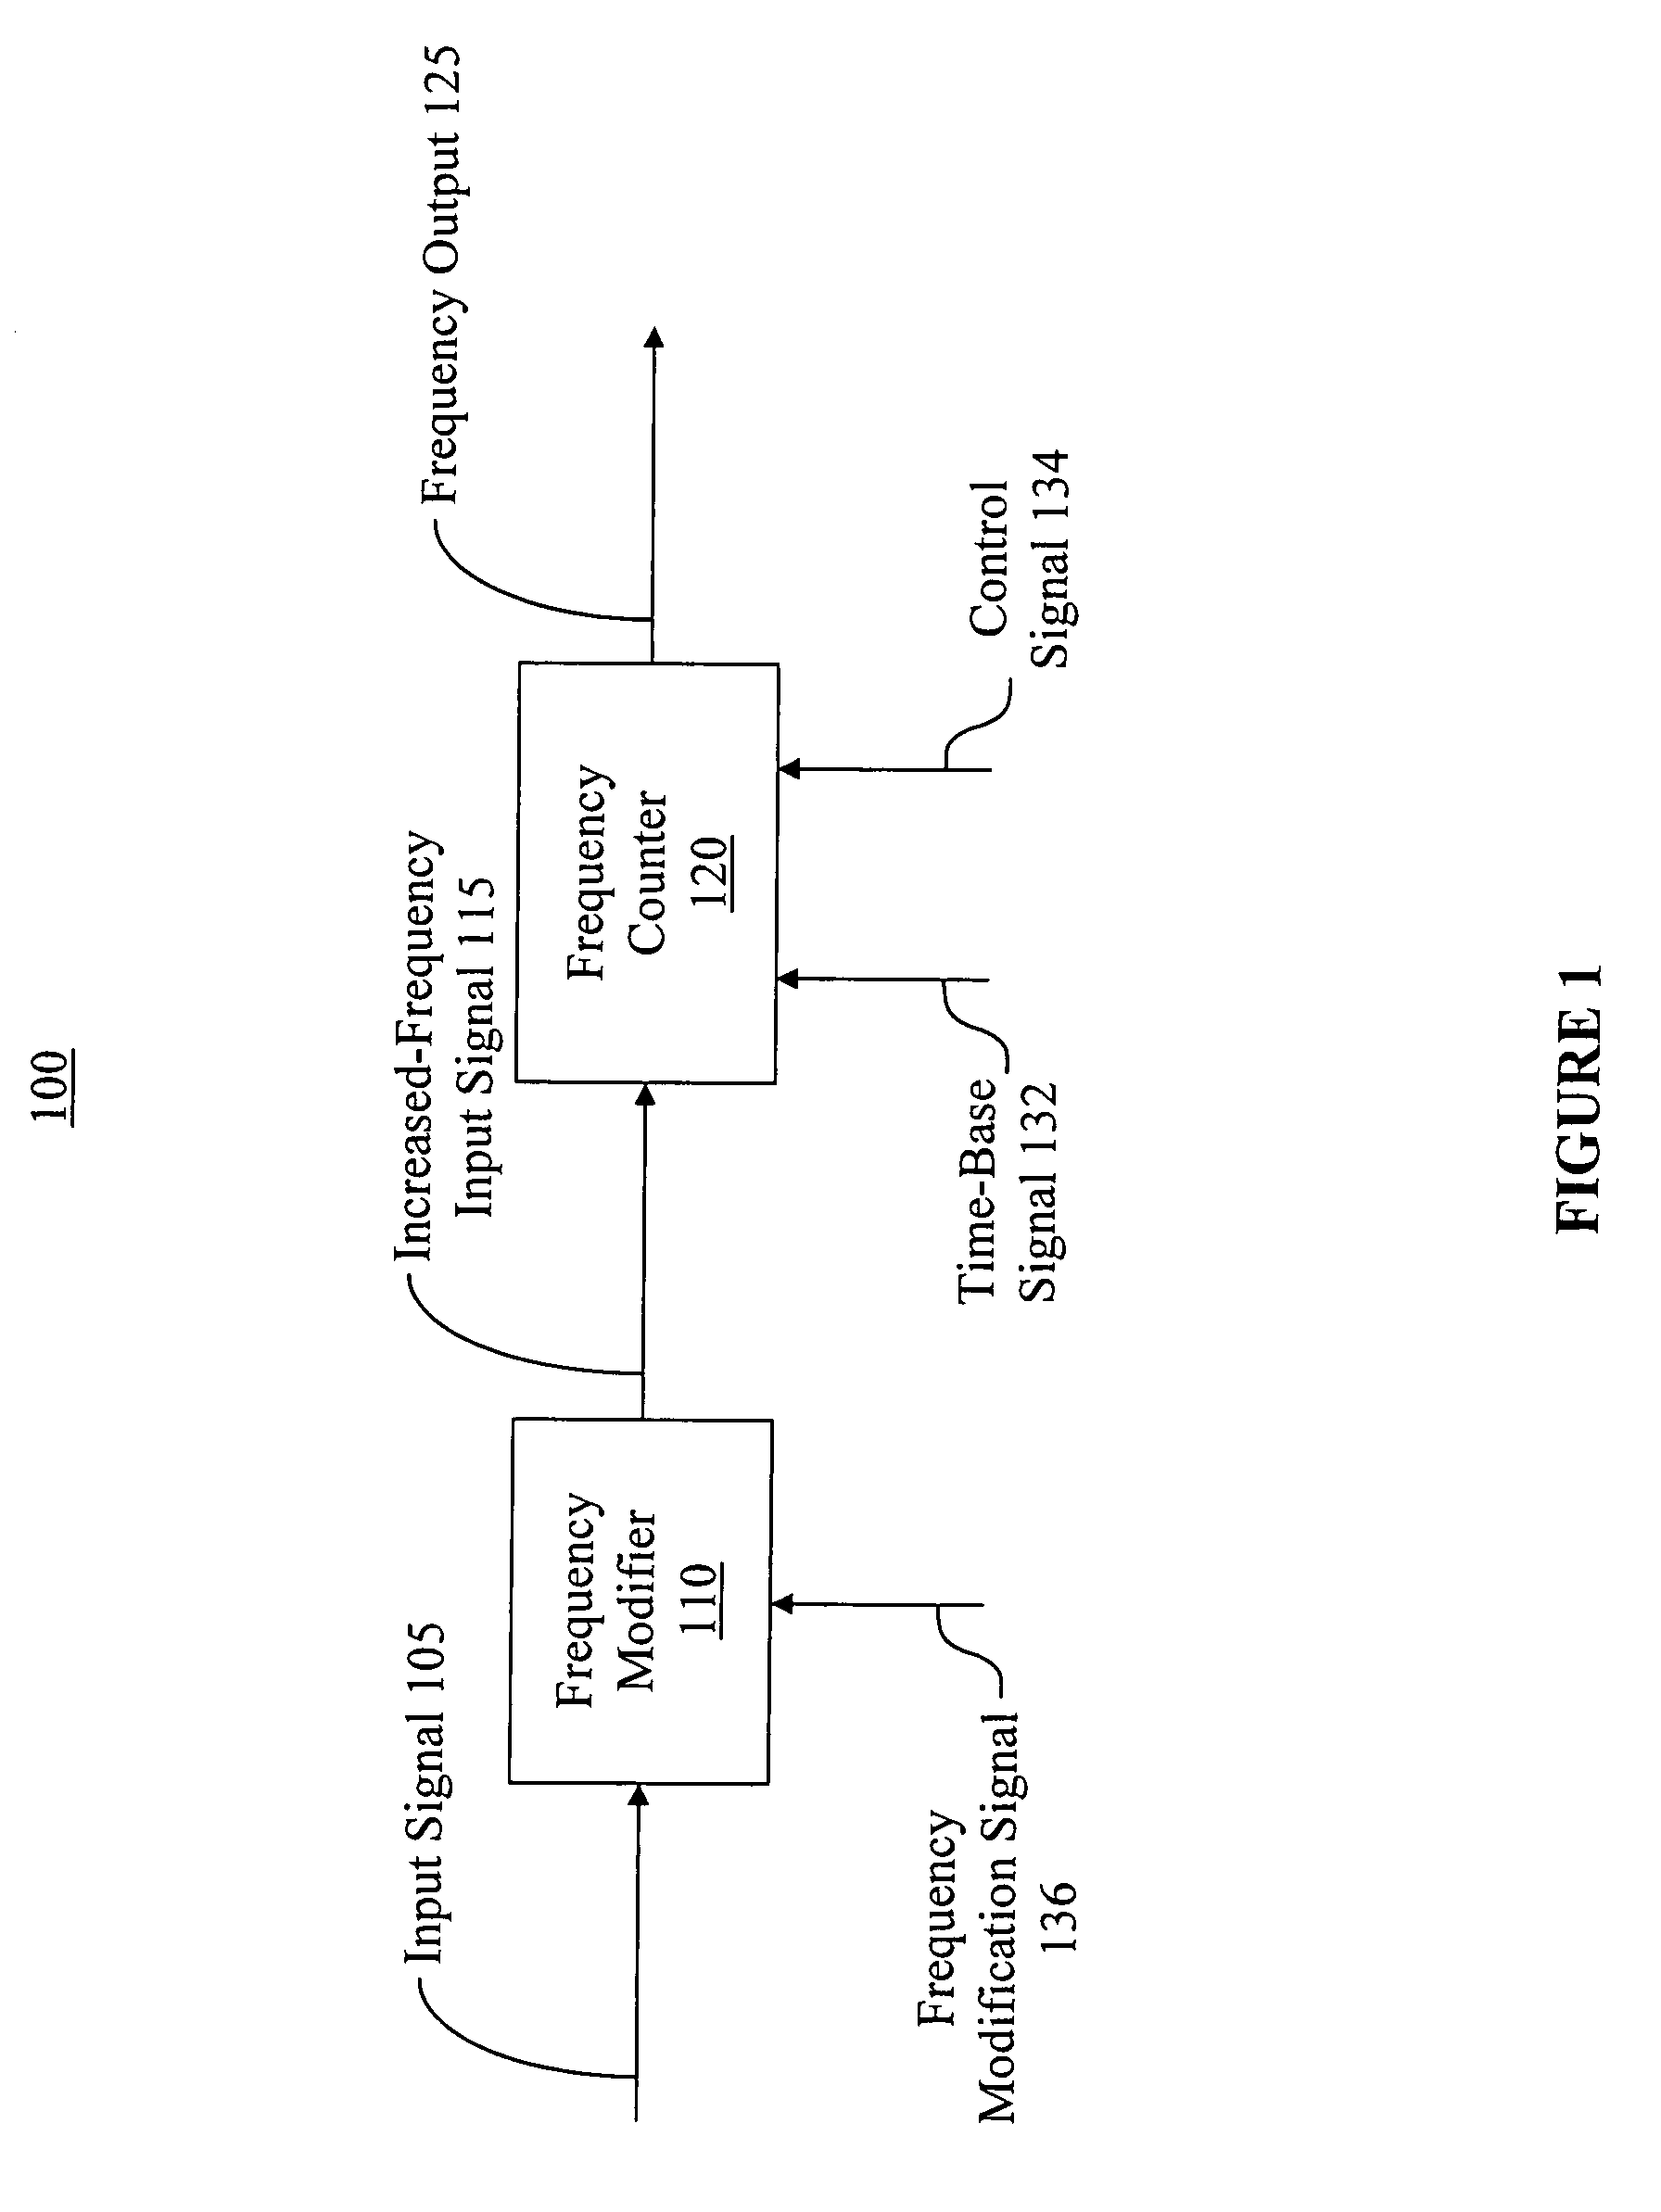 Method and apparatus for enhanced frequency measurement